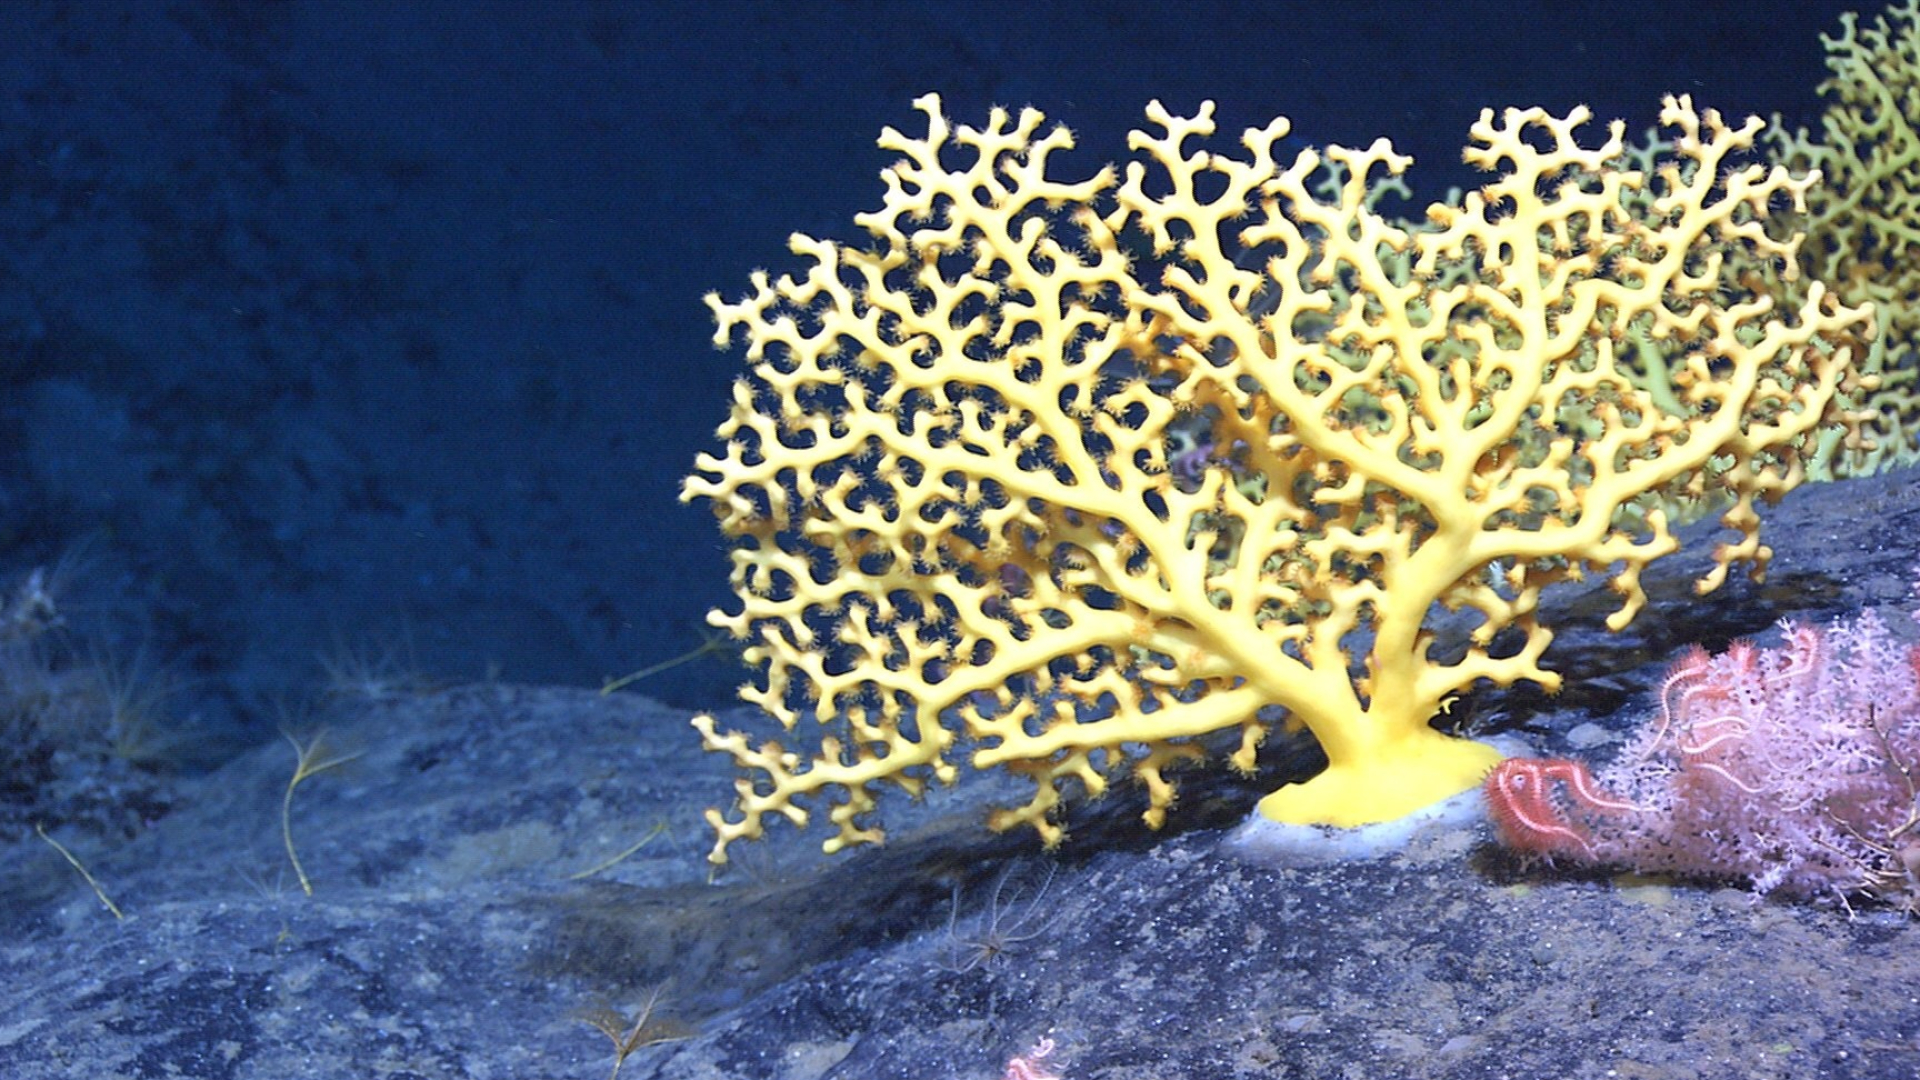 Sea Sponge: Deep sea coral, Can filter an amount of water 100,000 times their size each day. 1920x1080 Full HD Background.